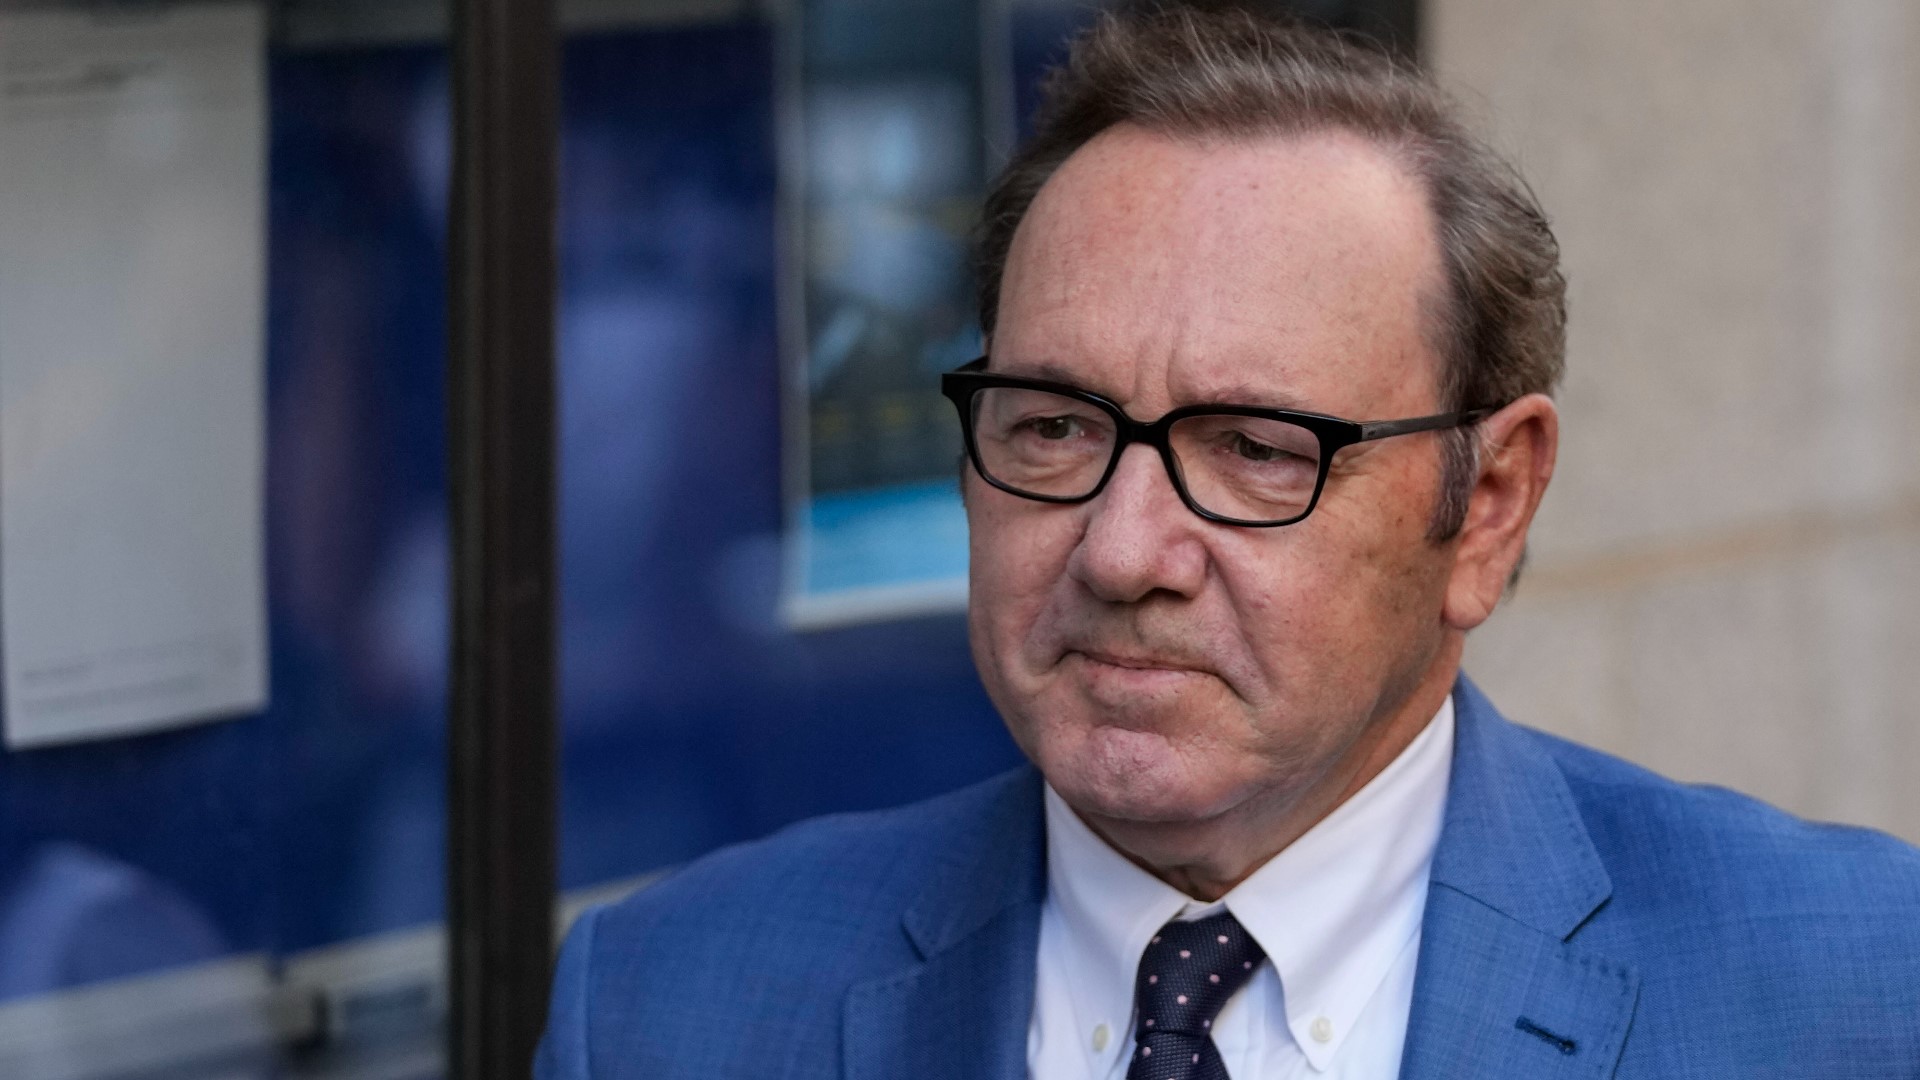 Kevin Spacey faces sex assault trial in London ktvb